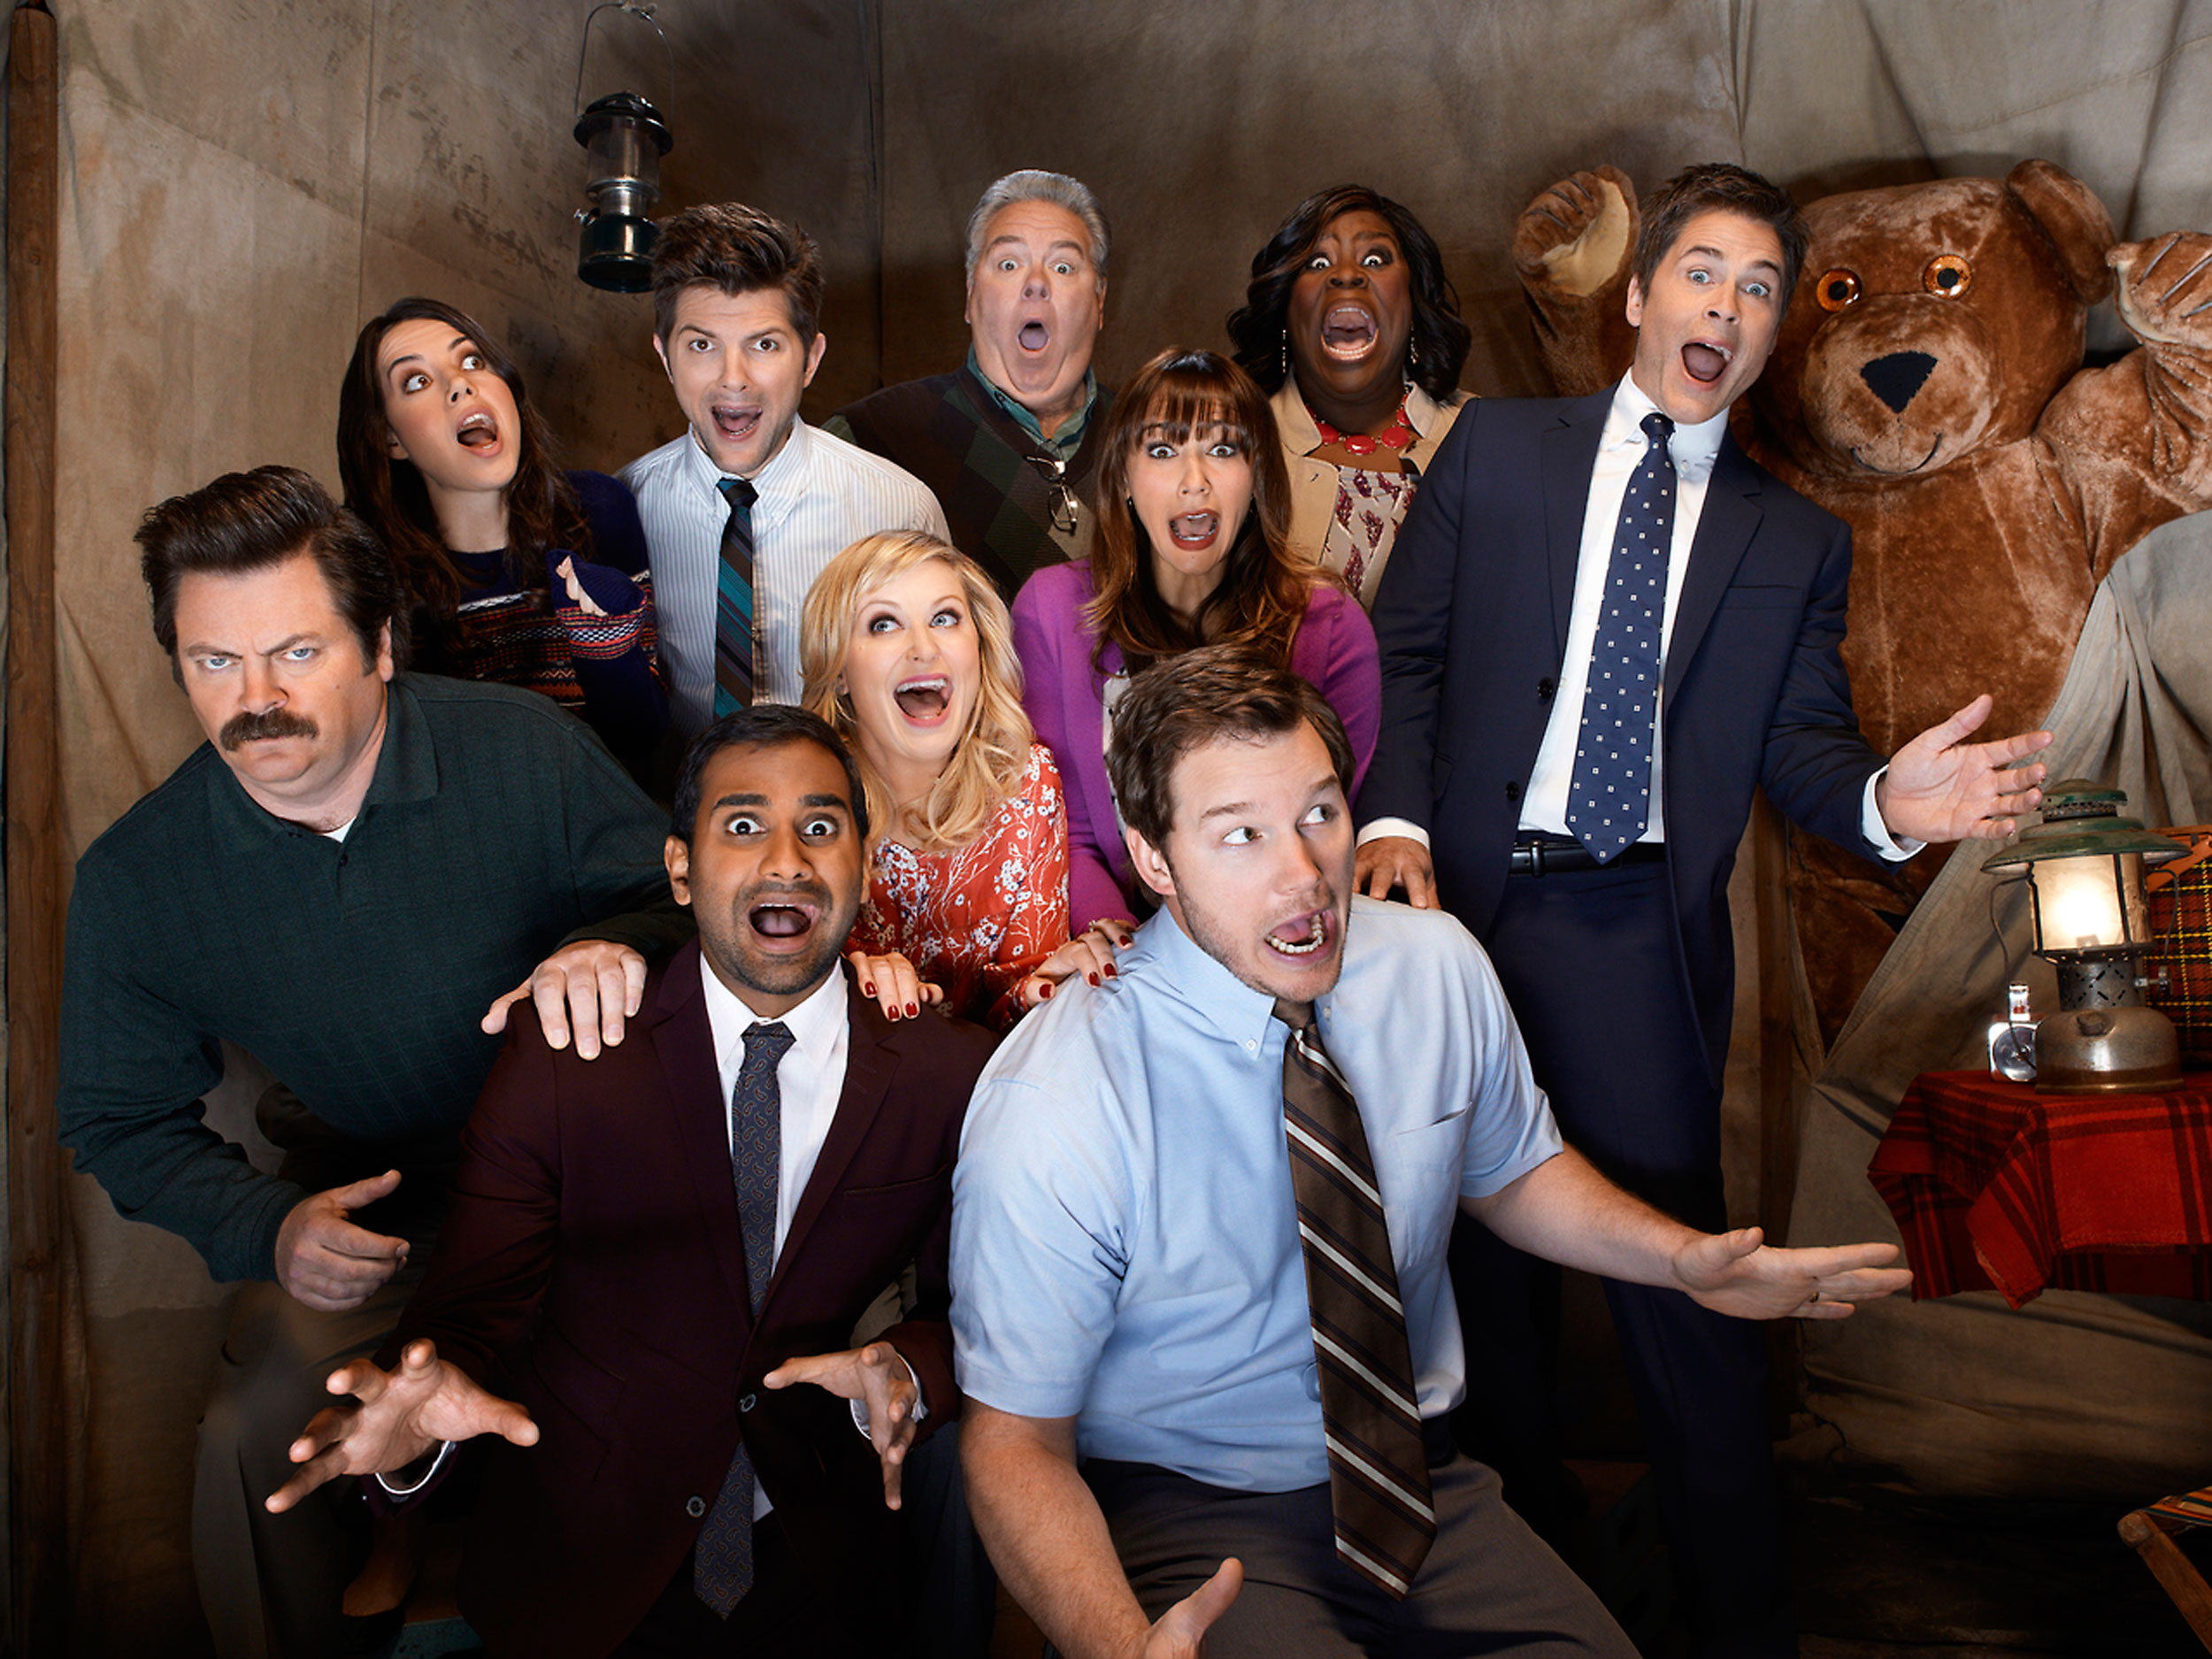 parks and rec wallpaper,social group,people,event,fun,photography